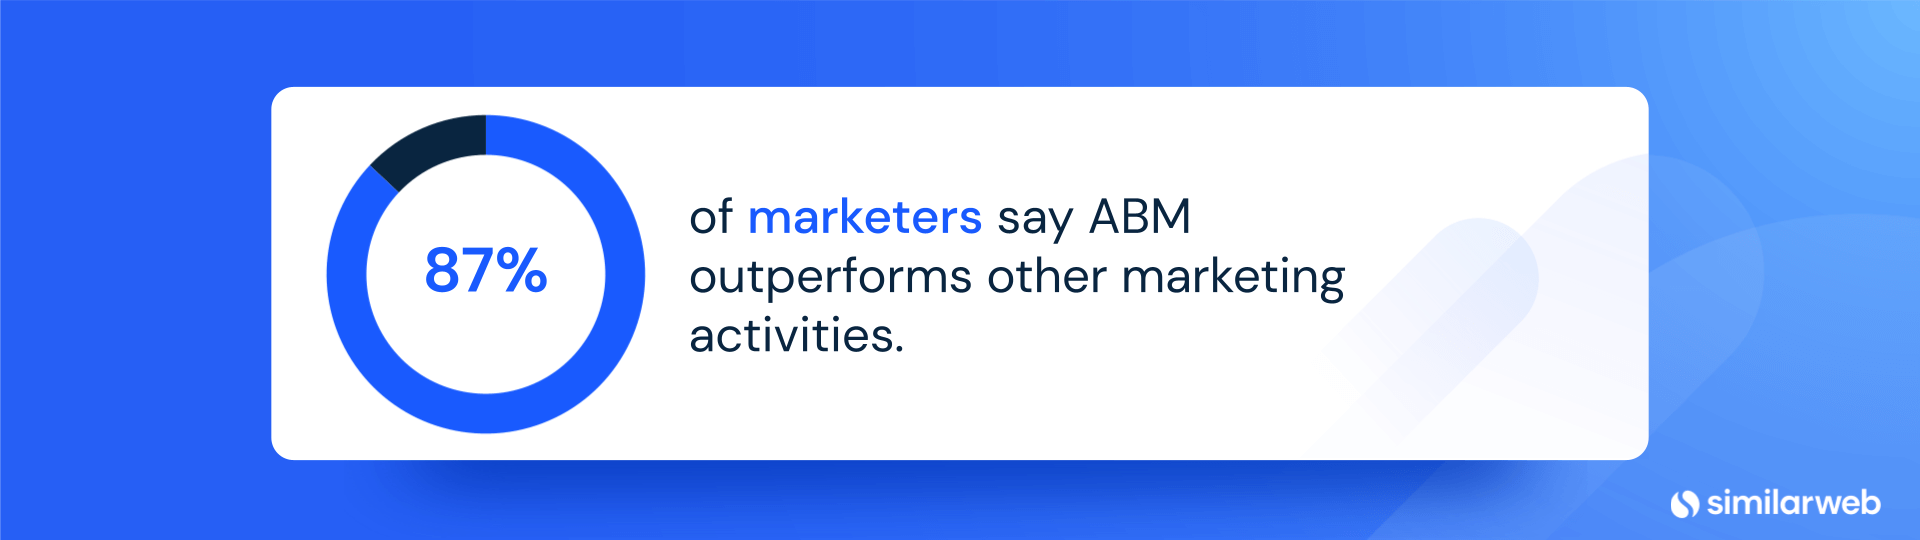 More than three-quarters of marketers (87%) say ABM outperforms other marketing activities.